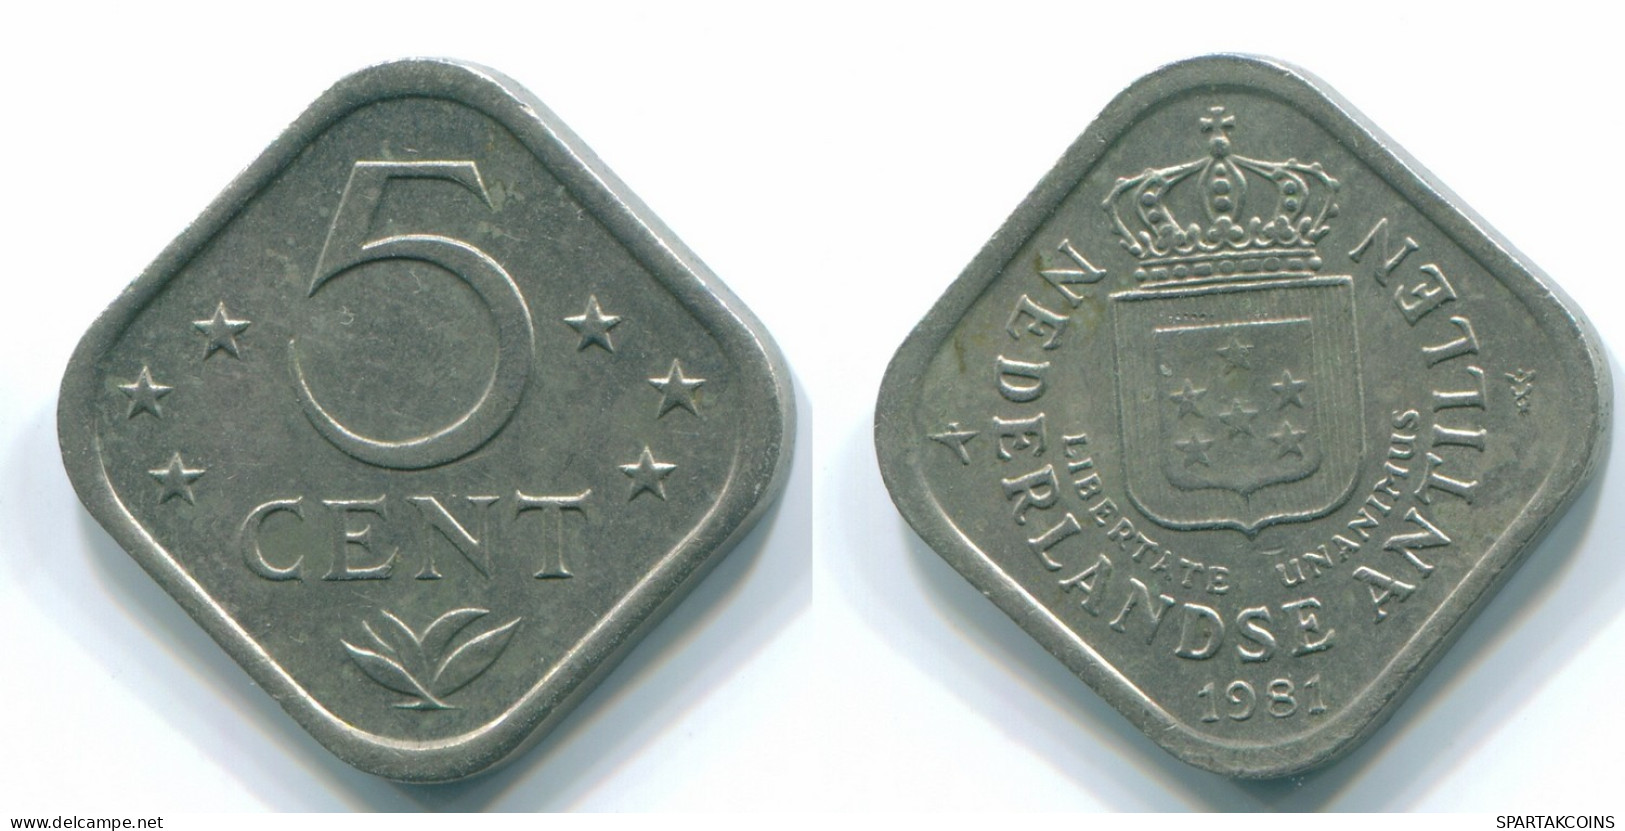 5 CENTS 1981 NETHERLANDS ANTILLES Nickel Colonial Coin #S12345.U.A - Netherlands Antilles